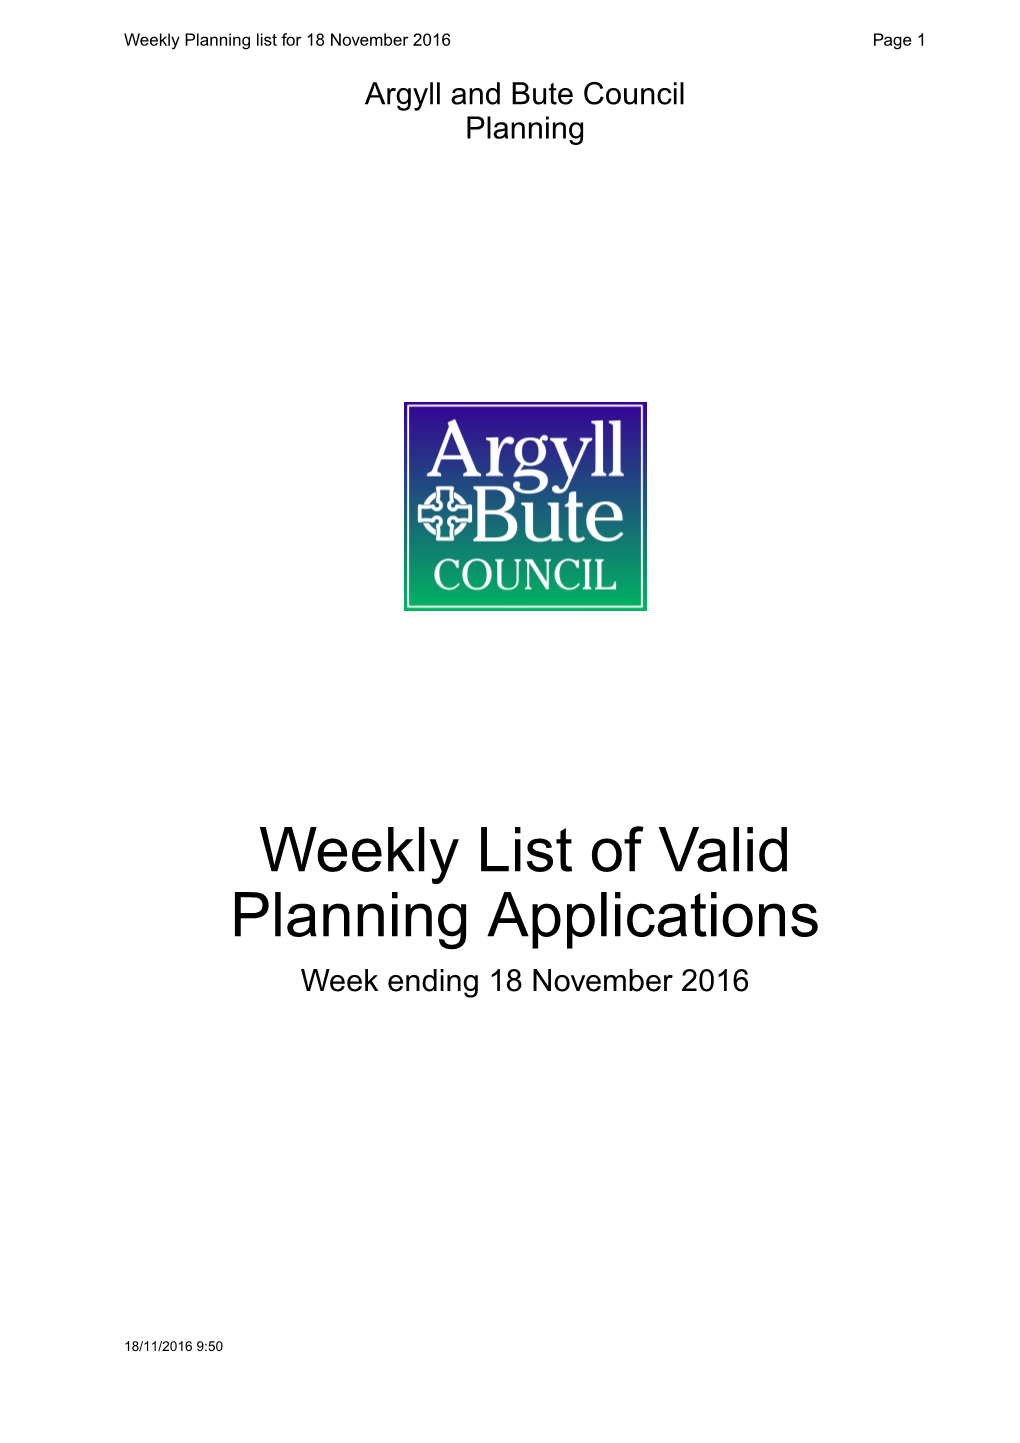 Weekly List of Valid Planning Applications 18Th November 2016.Pdf